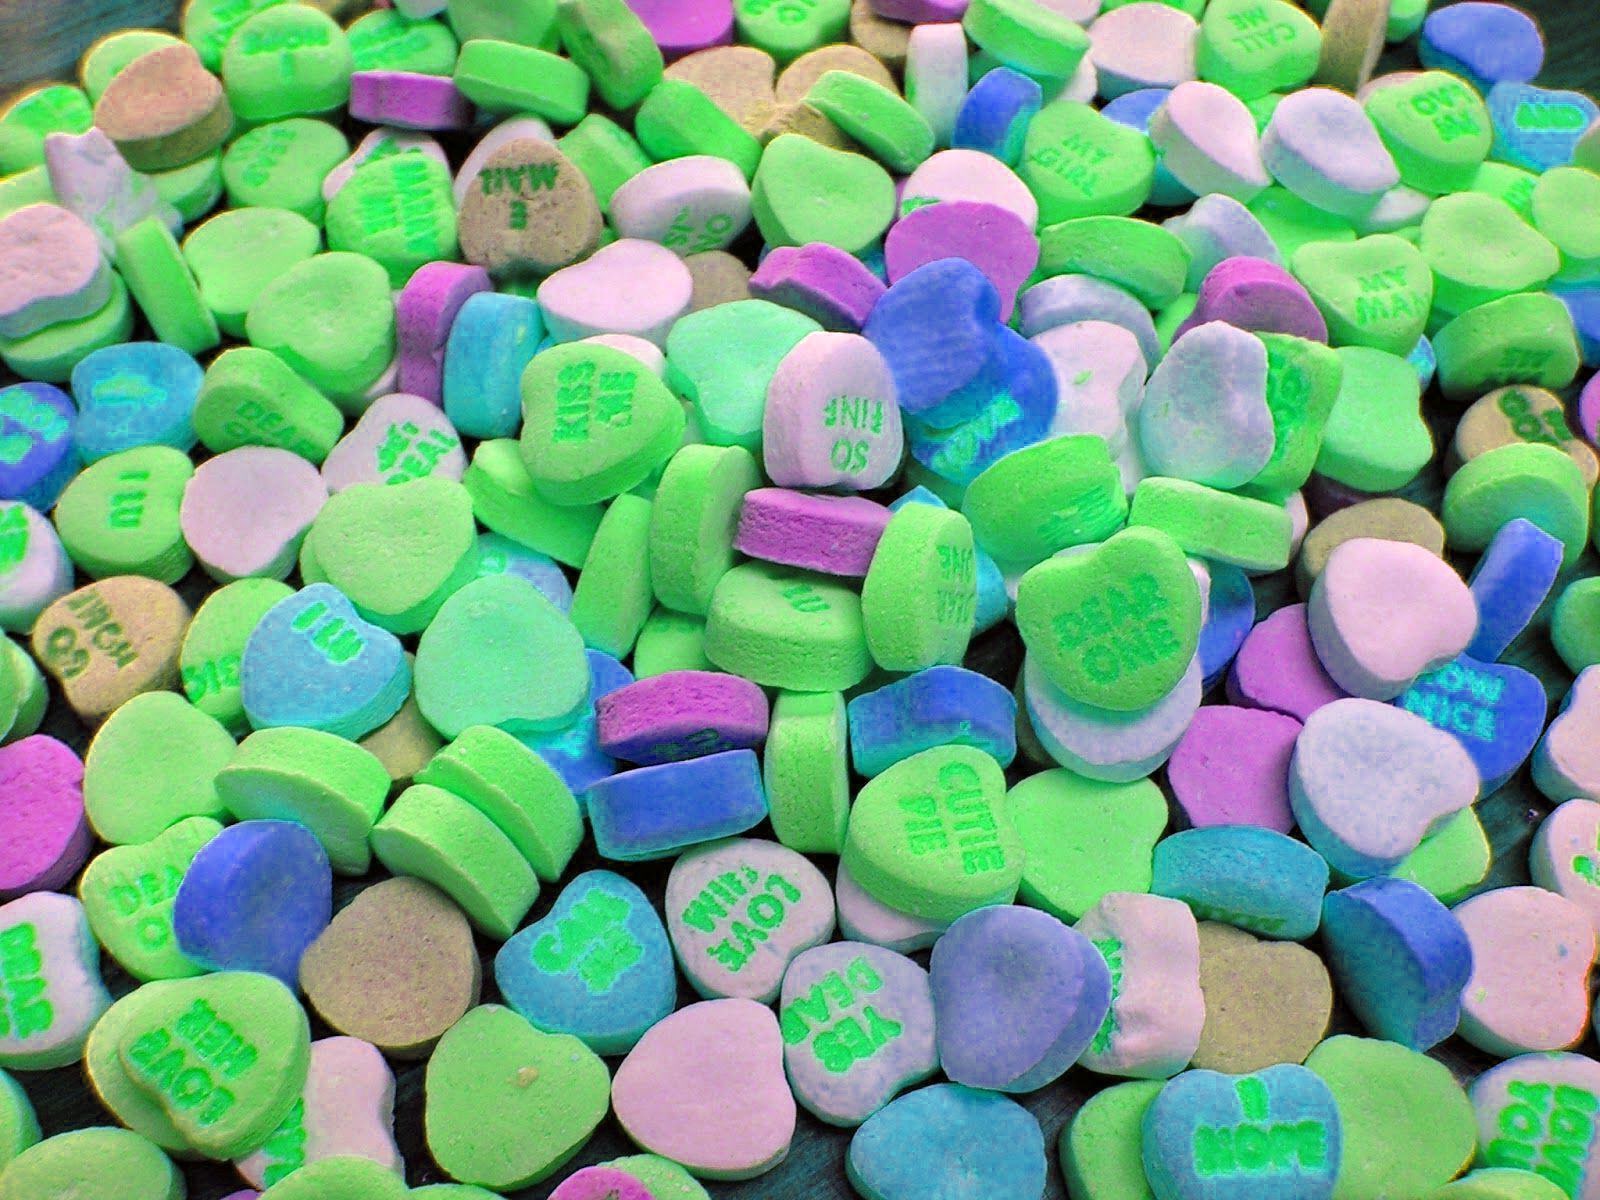 Candy hearts Wallpaper